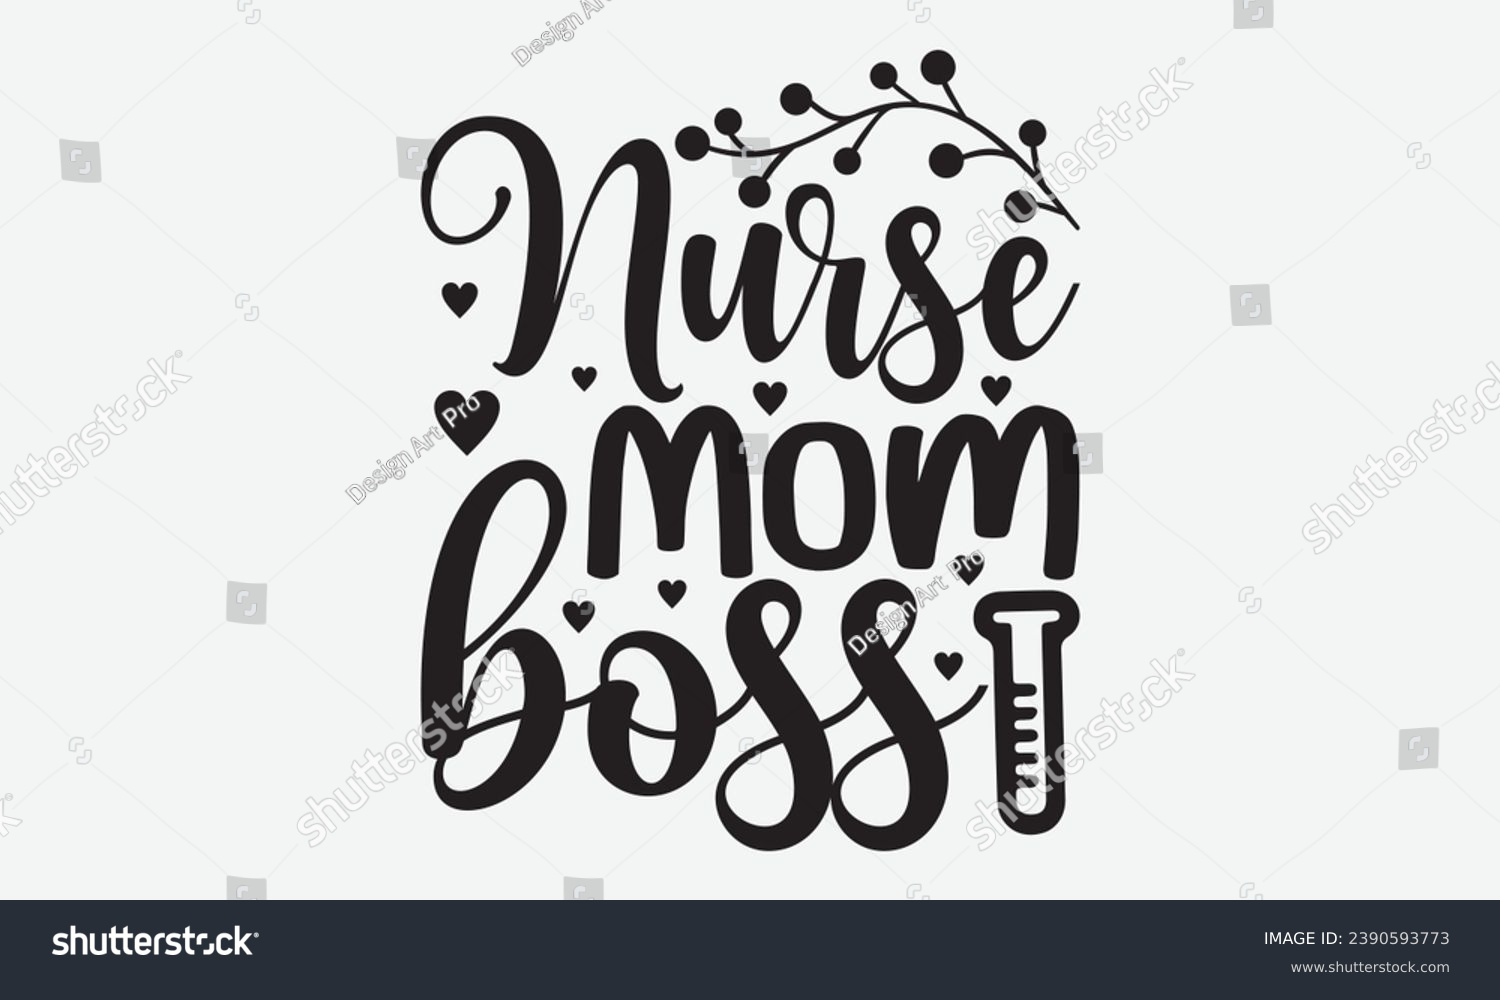 SVG of Nurse Mom Boss -Nurse T-Shirt Design, Modern Calligraphy Hand Drawn Typography Vector, Illustration For Prints On And Bags, Posters Mugs. svg